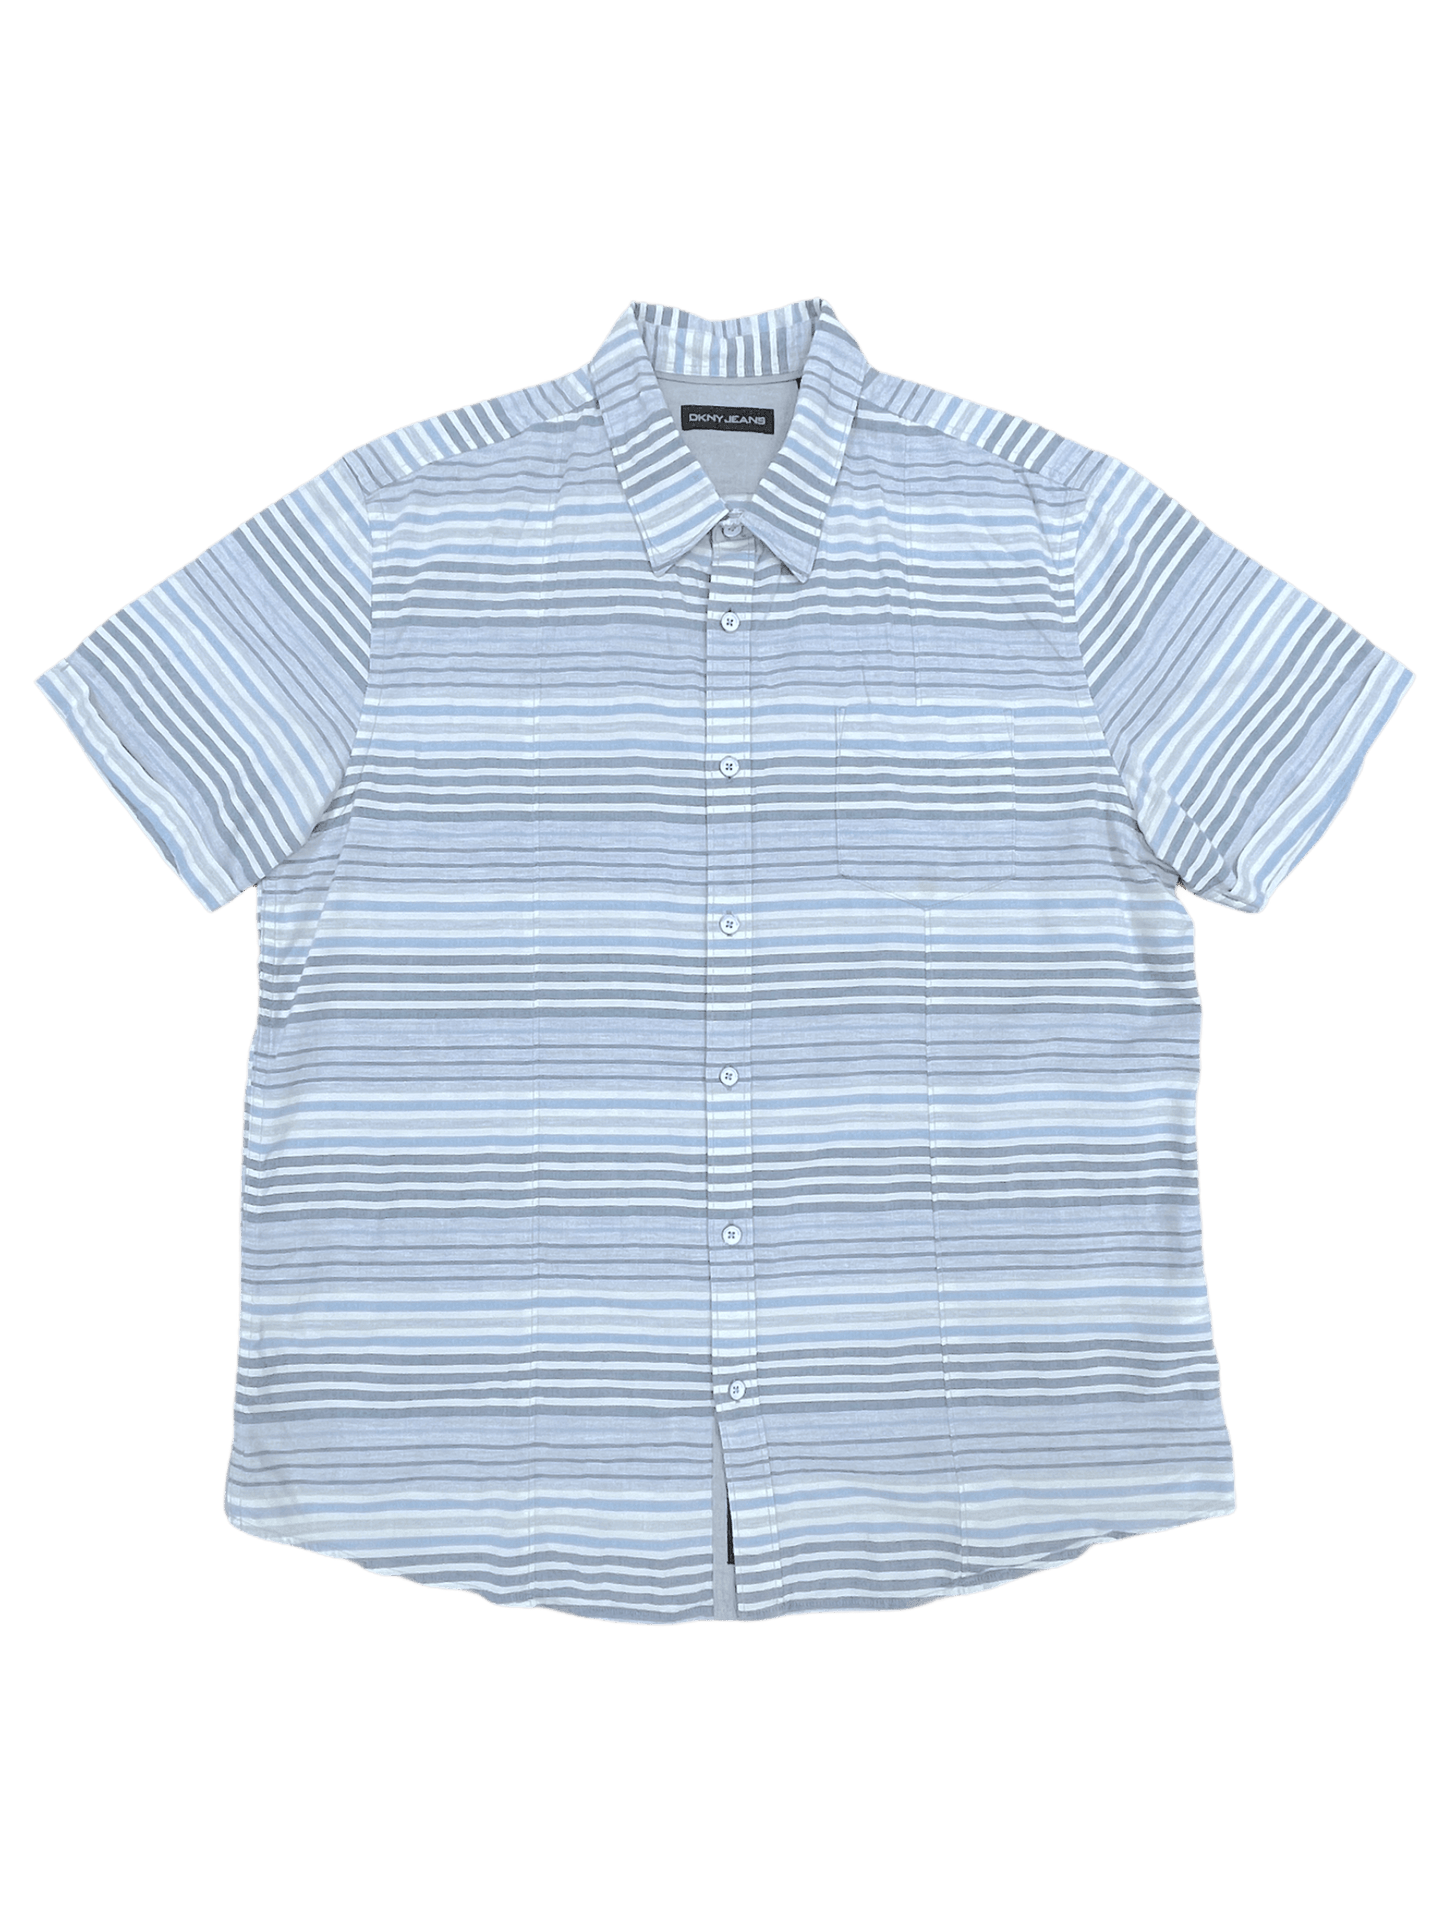 DKNY Blue Striped Button Up Short Sleeve Shirt XL - Genuine Design luxury consignment